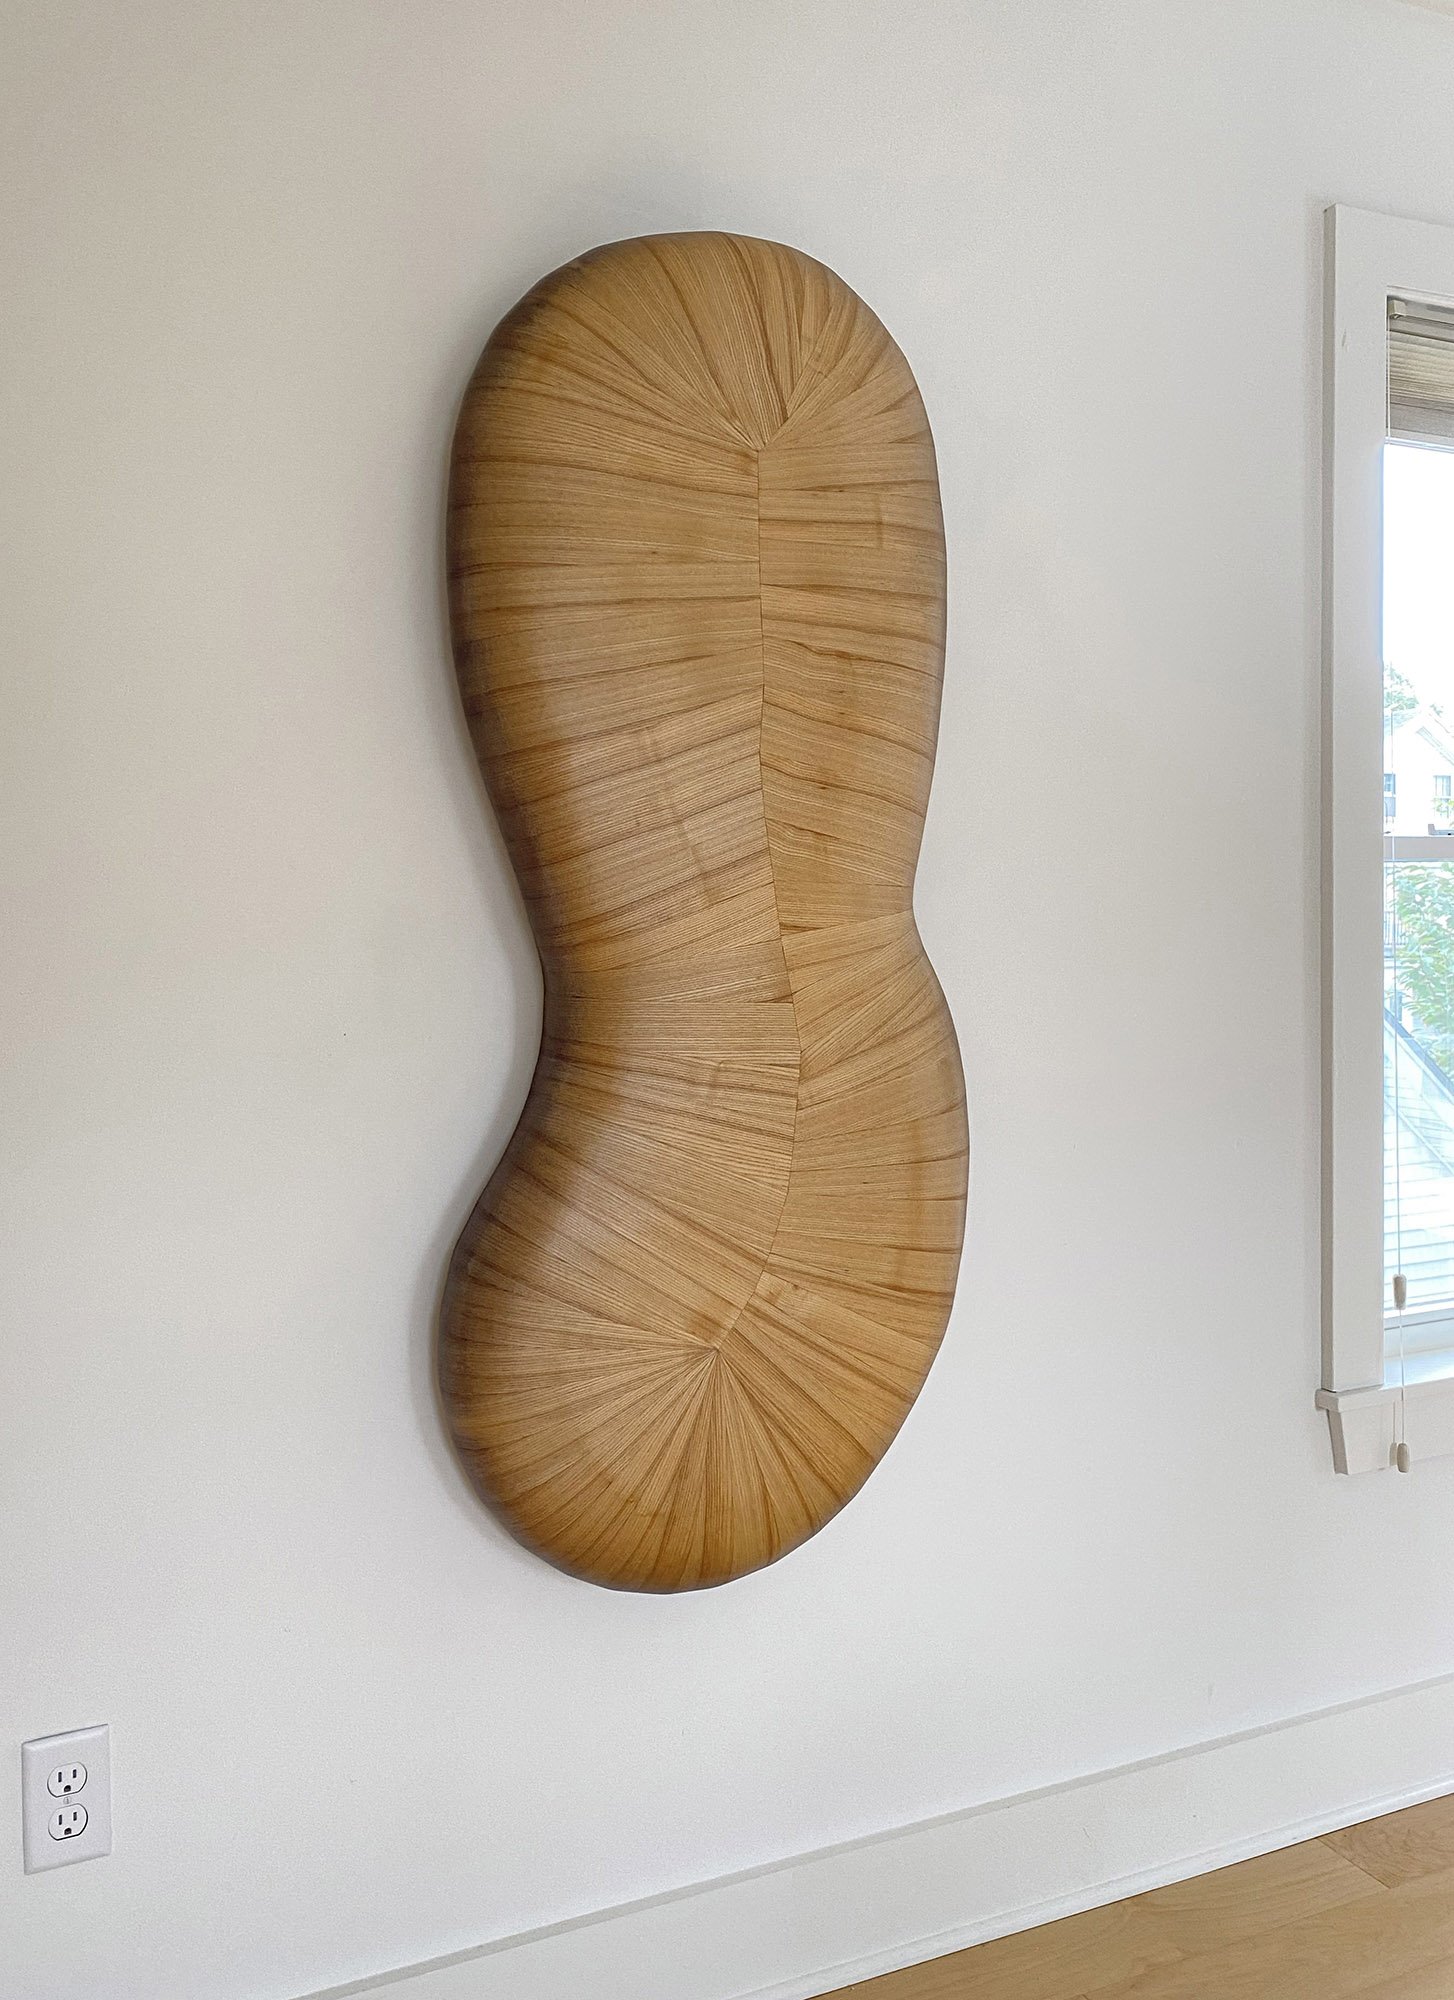  Carapace, 2019  56 x 24 x 7 inches  wood 